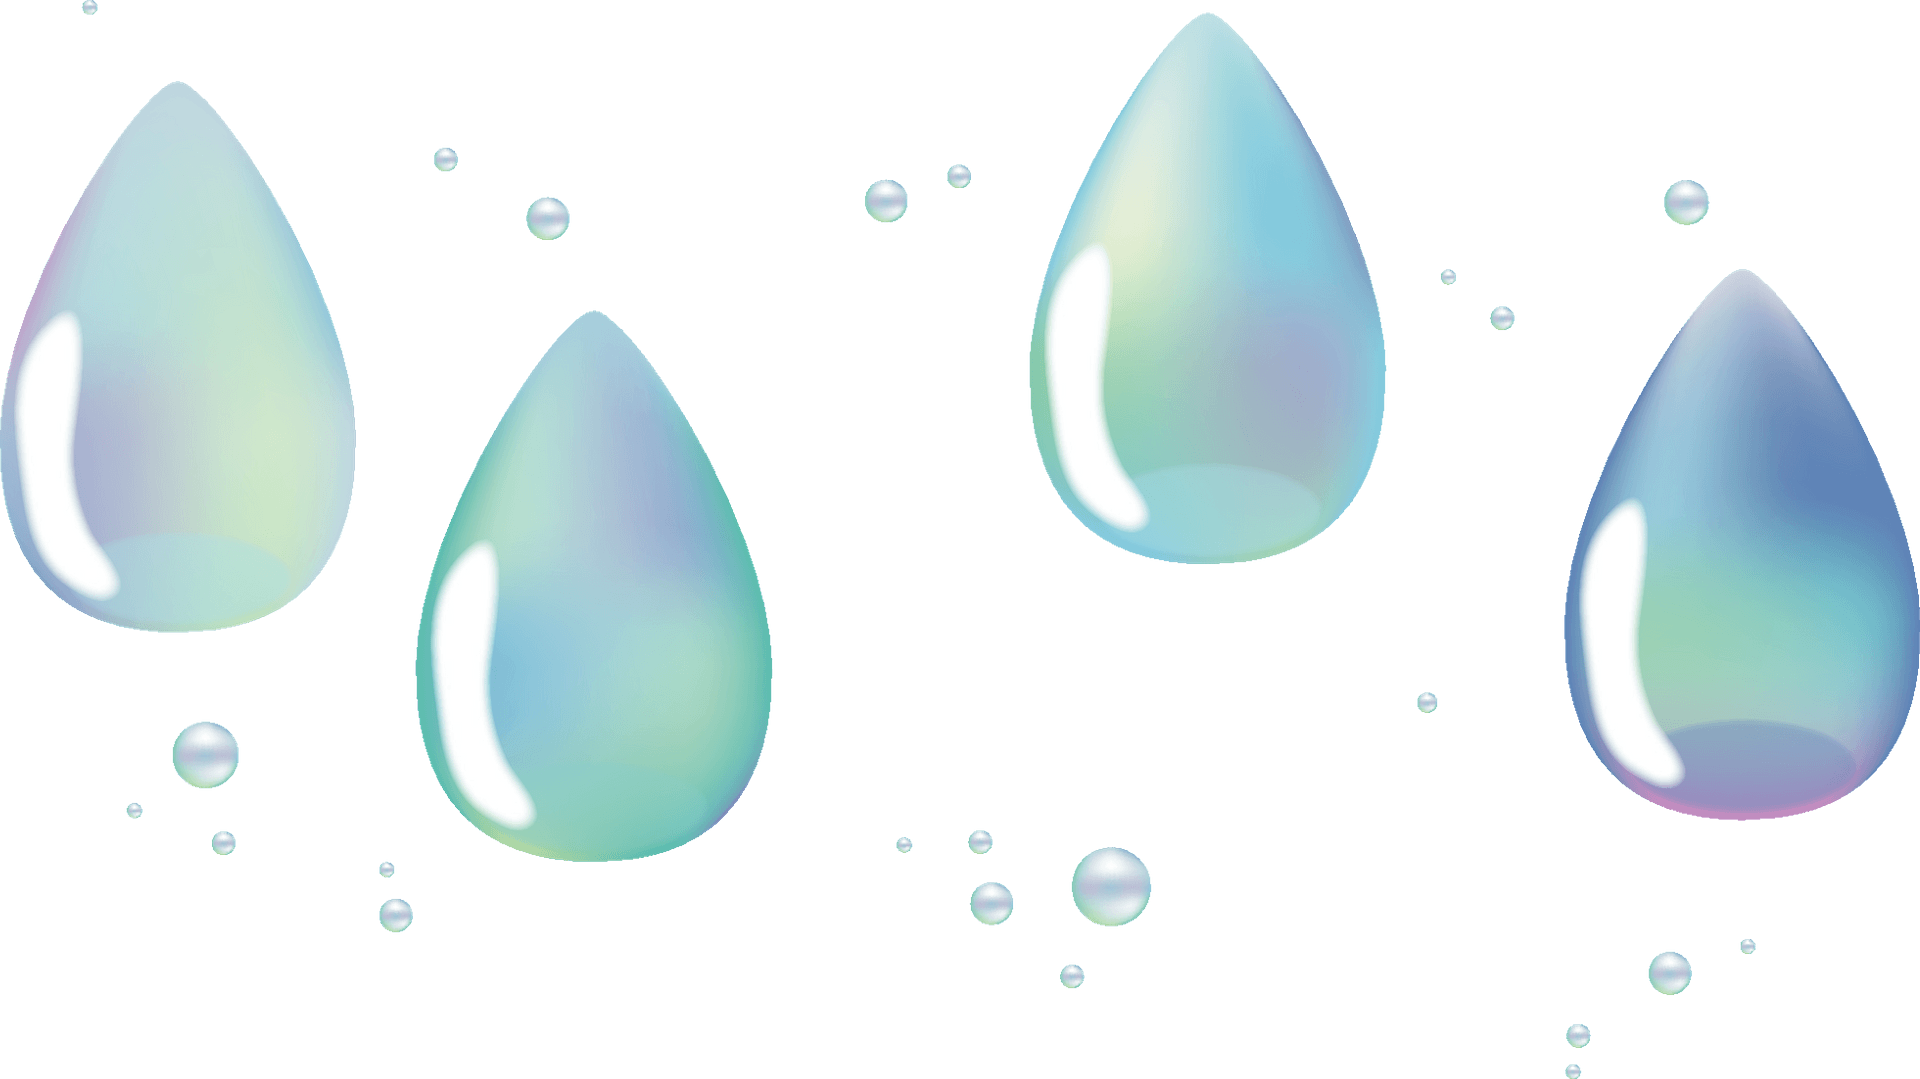 FREE Water Drop Clipart (Royalty-free)